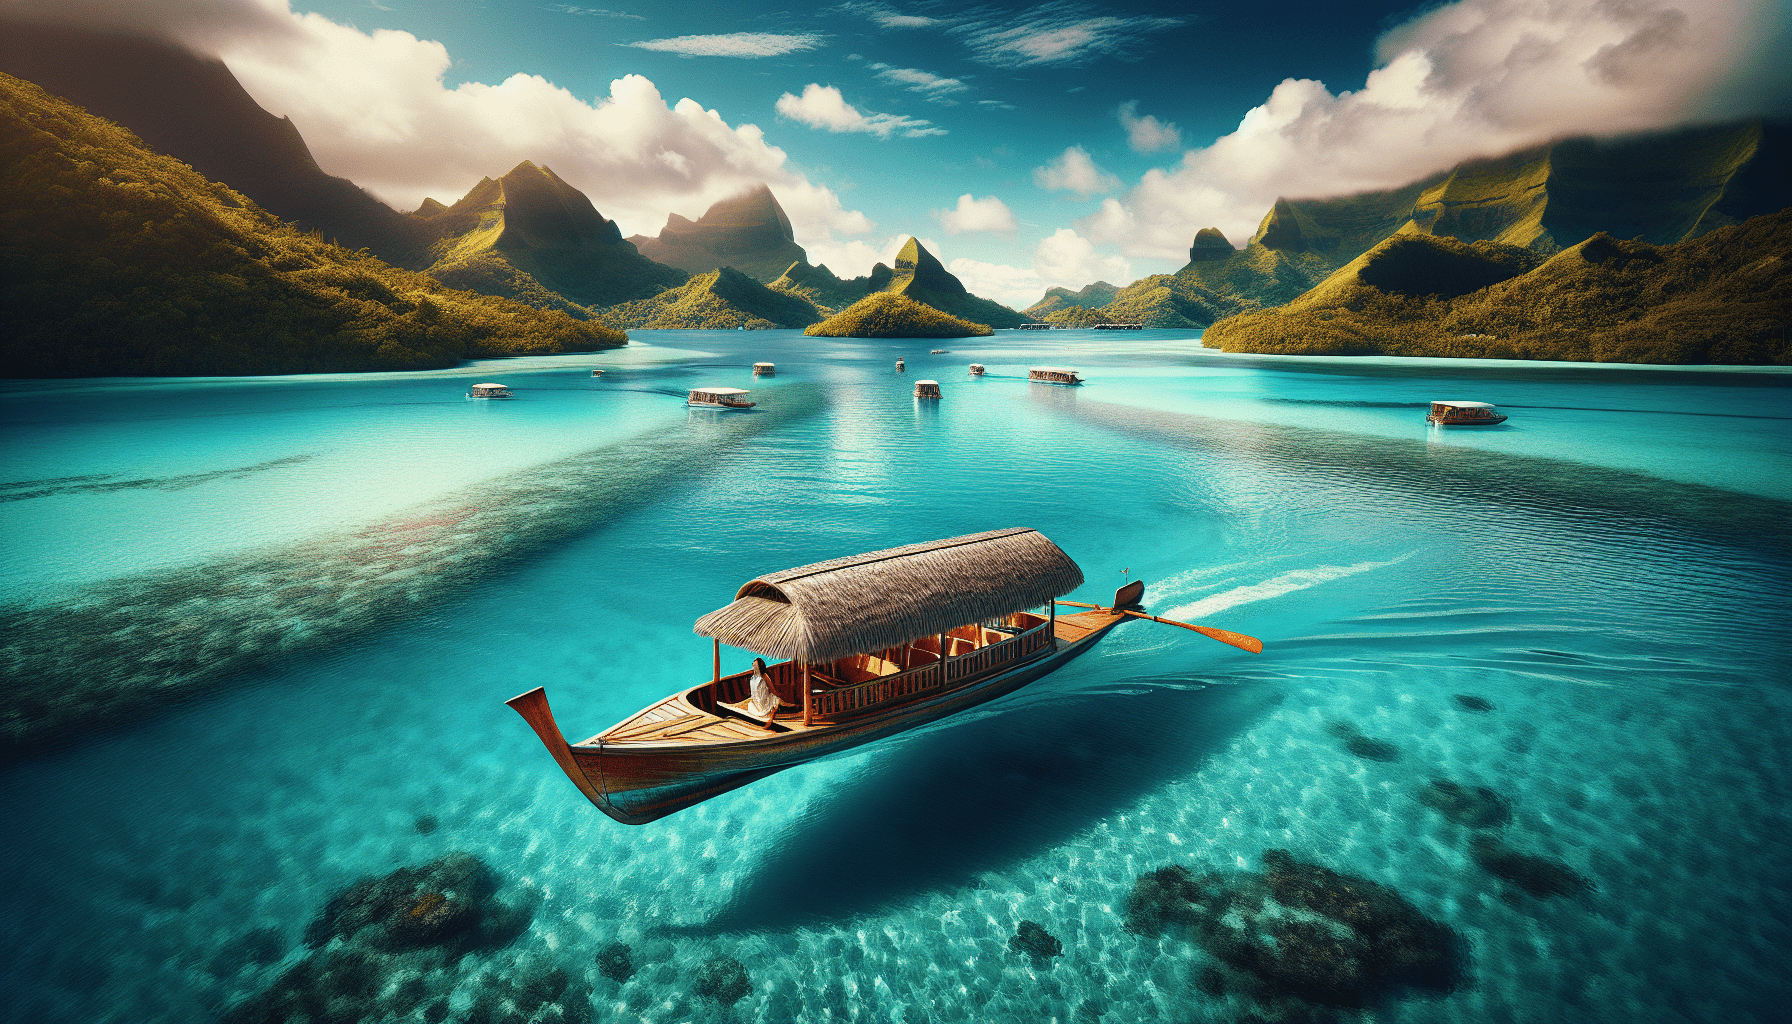 How Much Is A Water Taxi In Bora Bora?